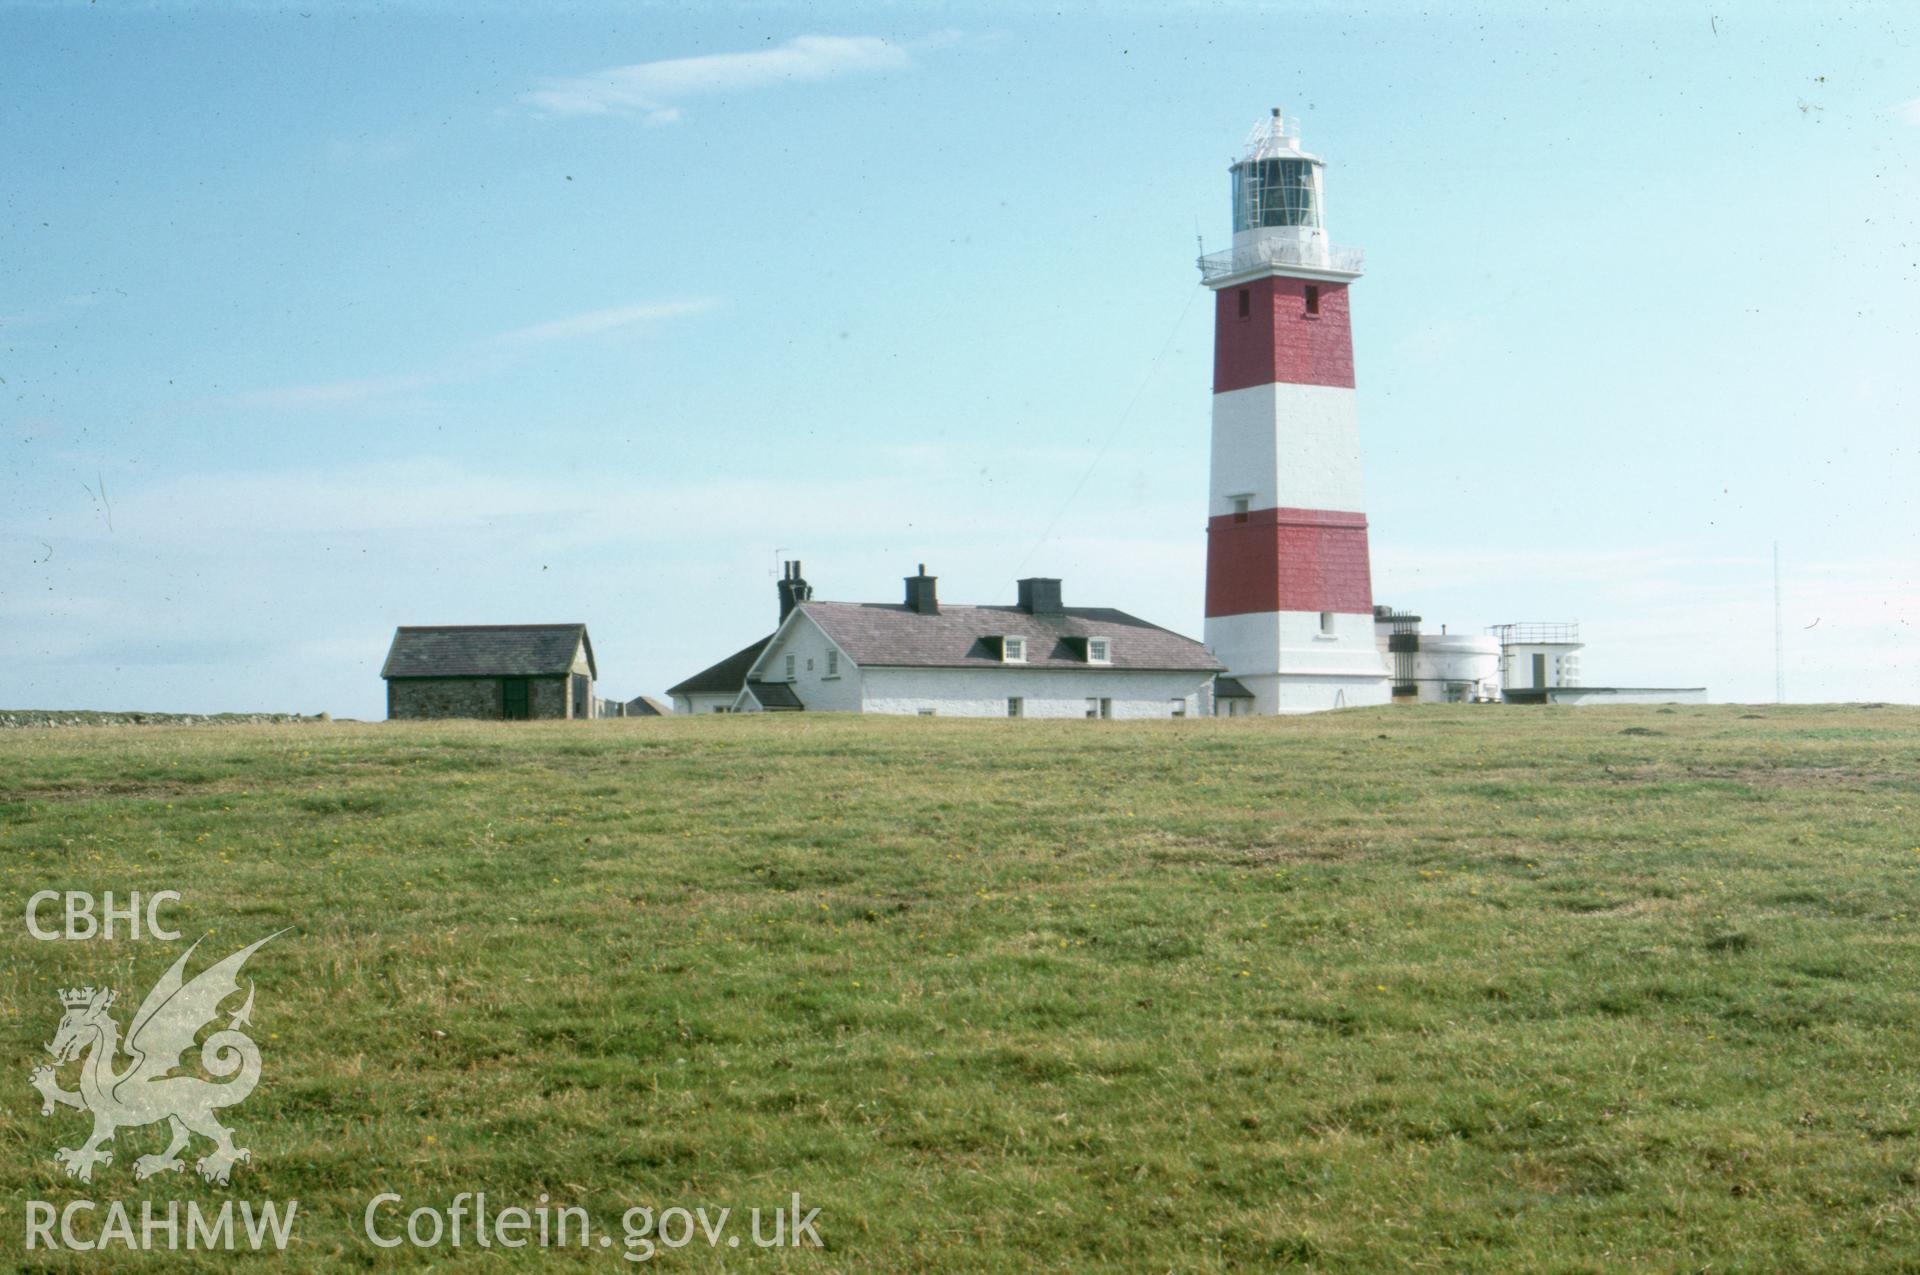 Colour slide showing general view of the lighthouse.